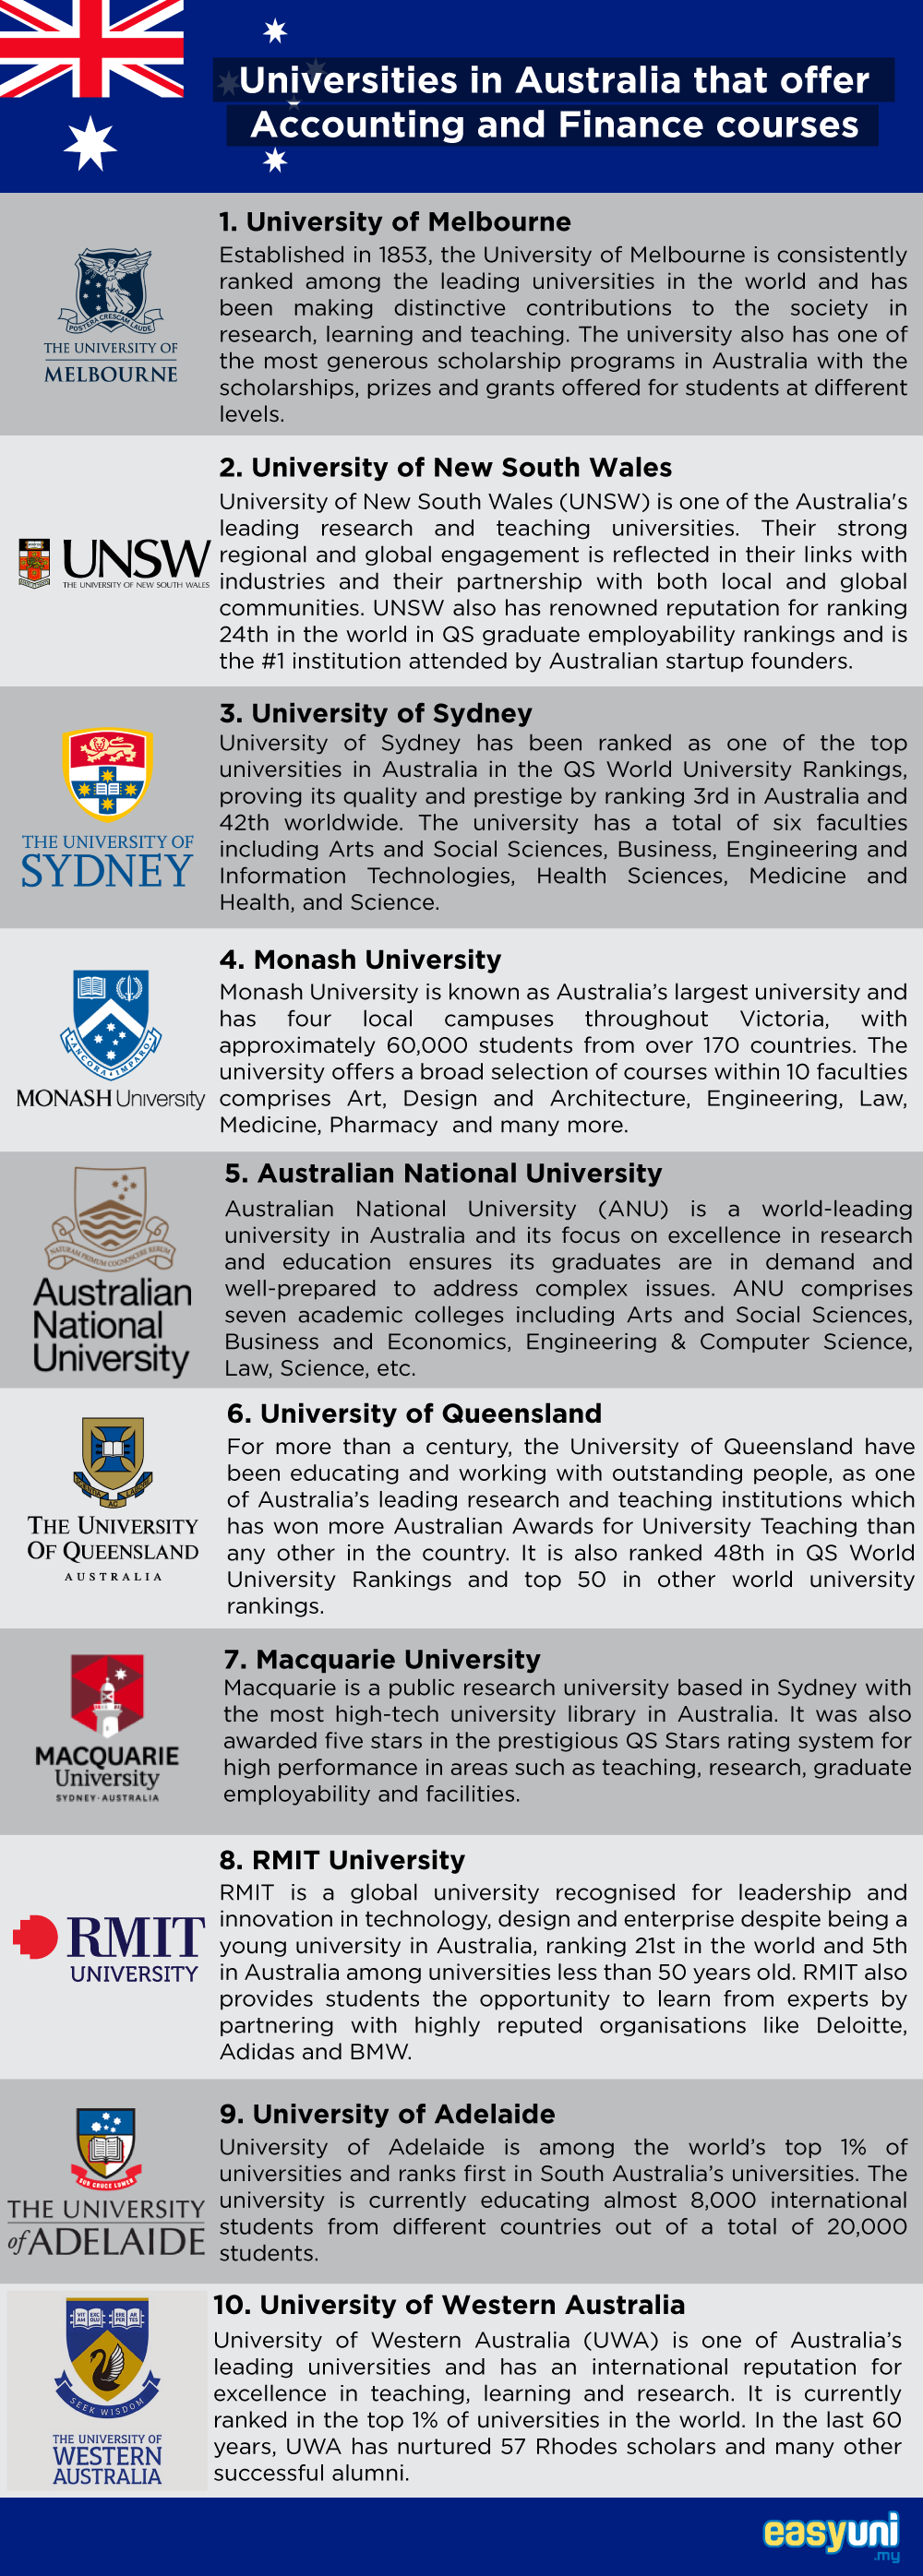 Universities in Australia that offer Accounting and Finance.